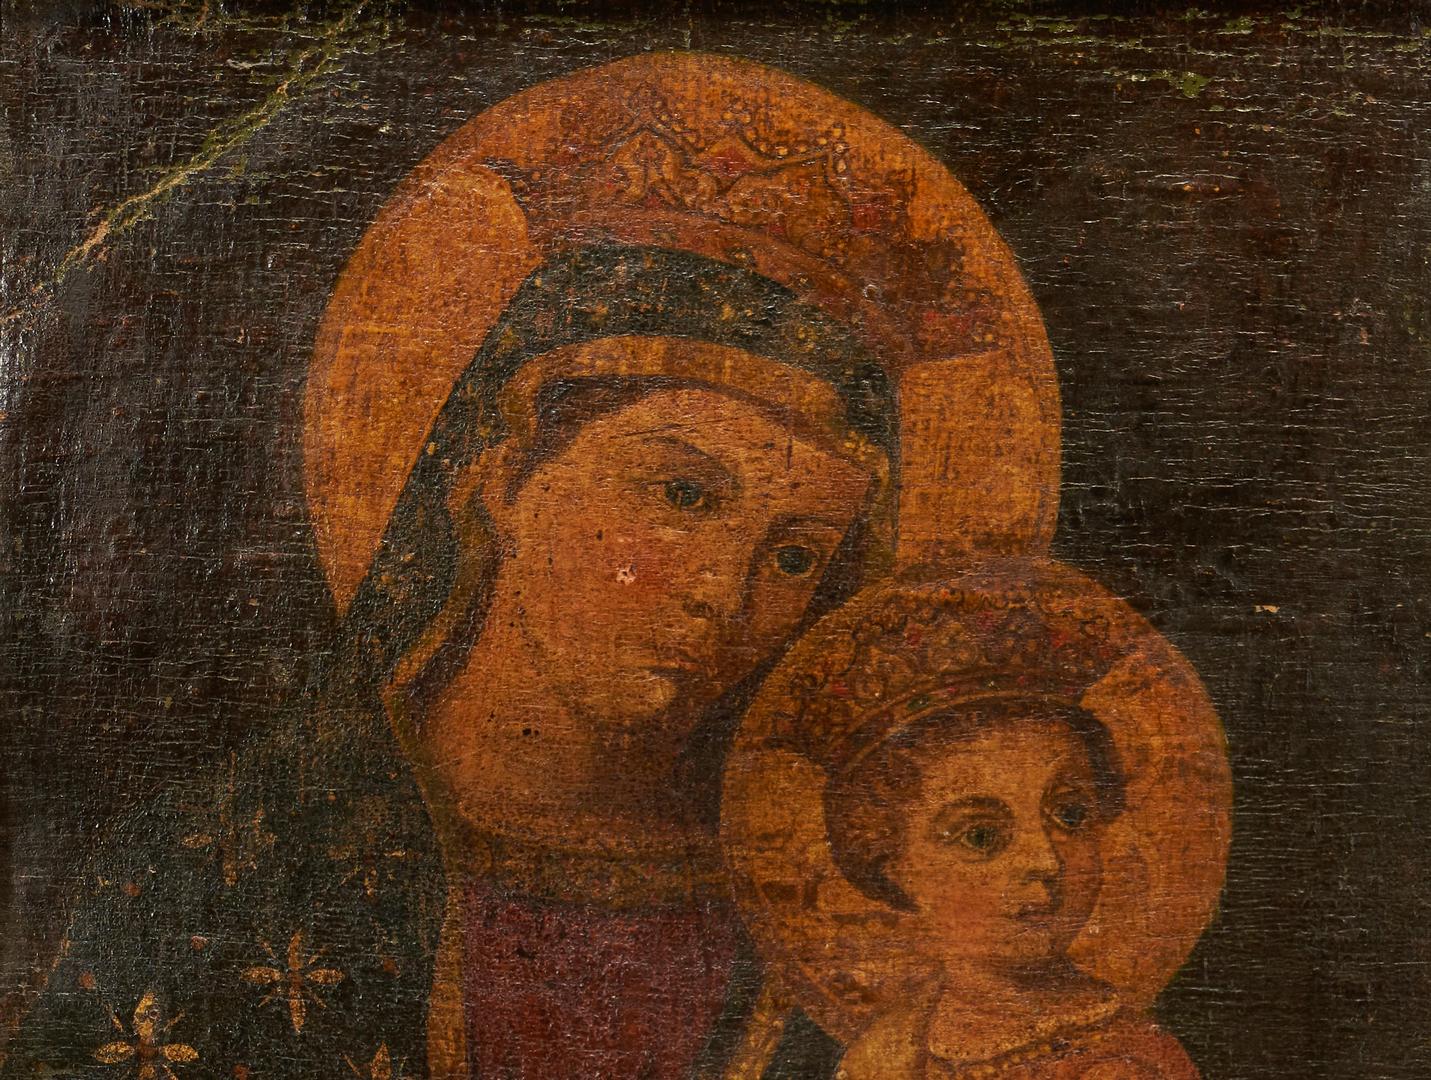 Lot 456: 2 South American Madonna and Child Paintings incl. Spanish Colonial and Retablo